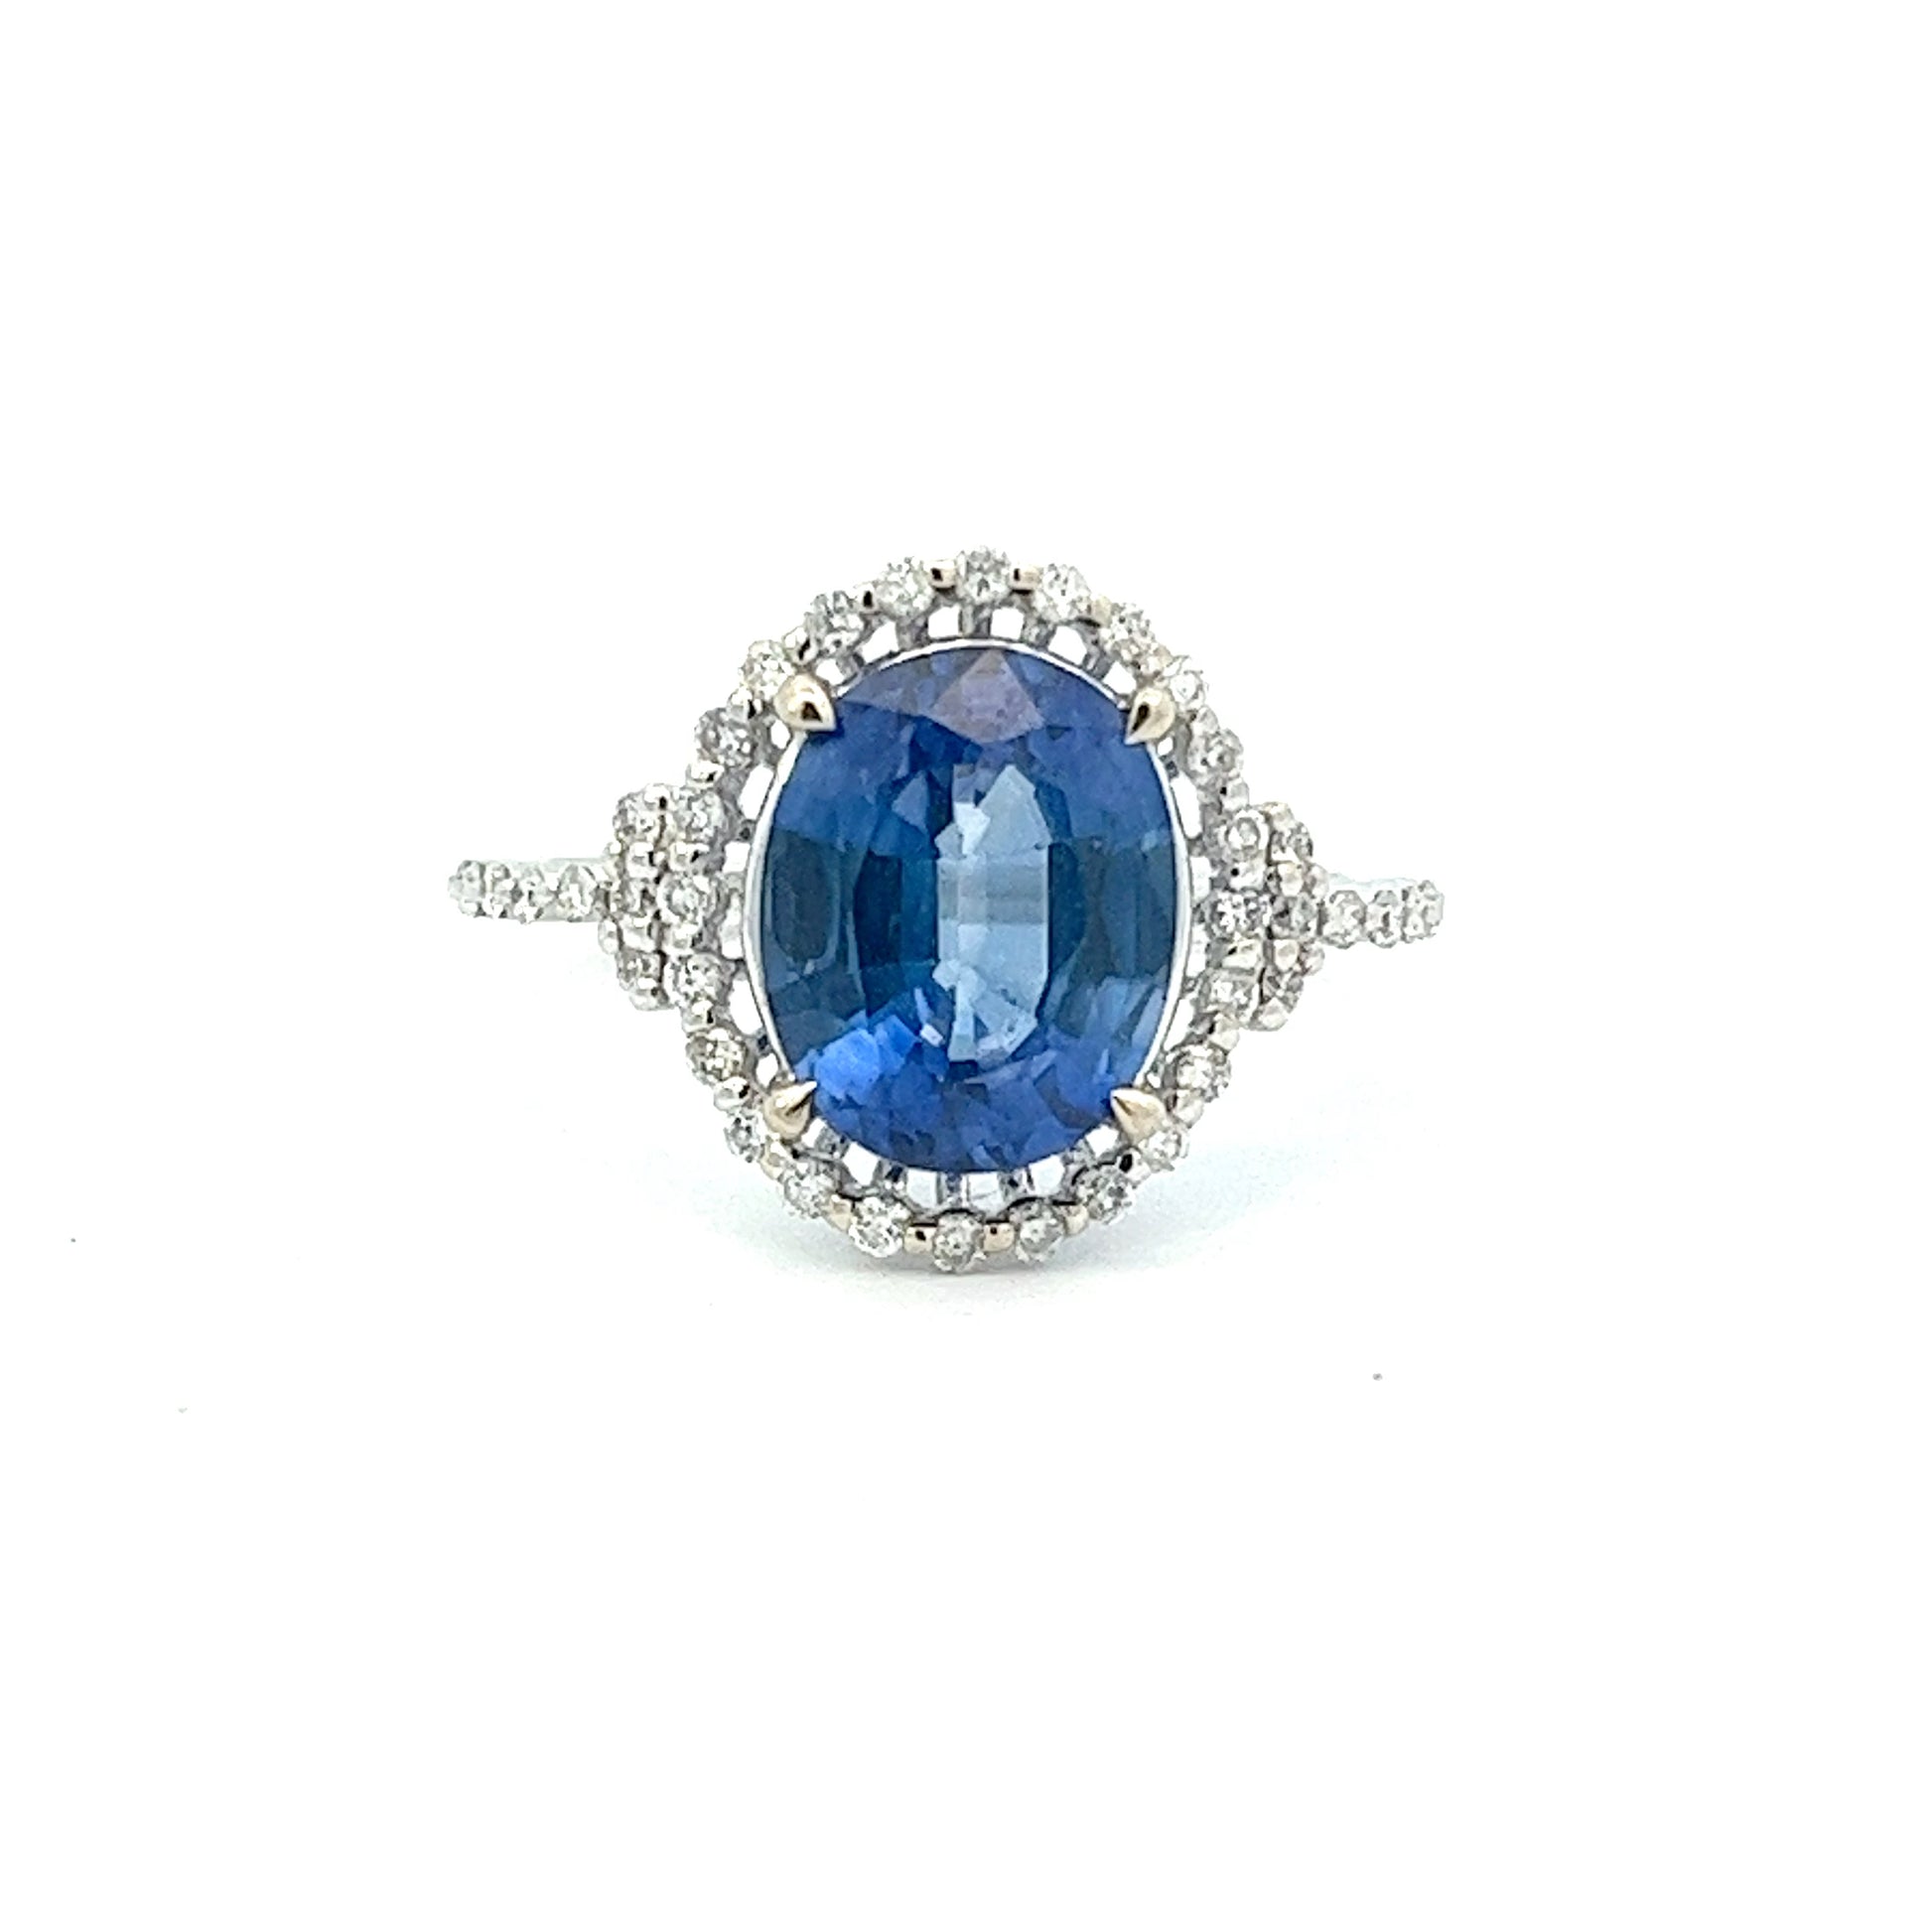 3.82ct Oval Sapphire and Diamond Ring